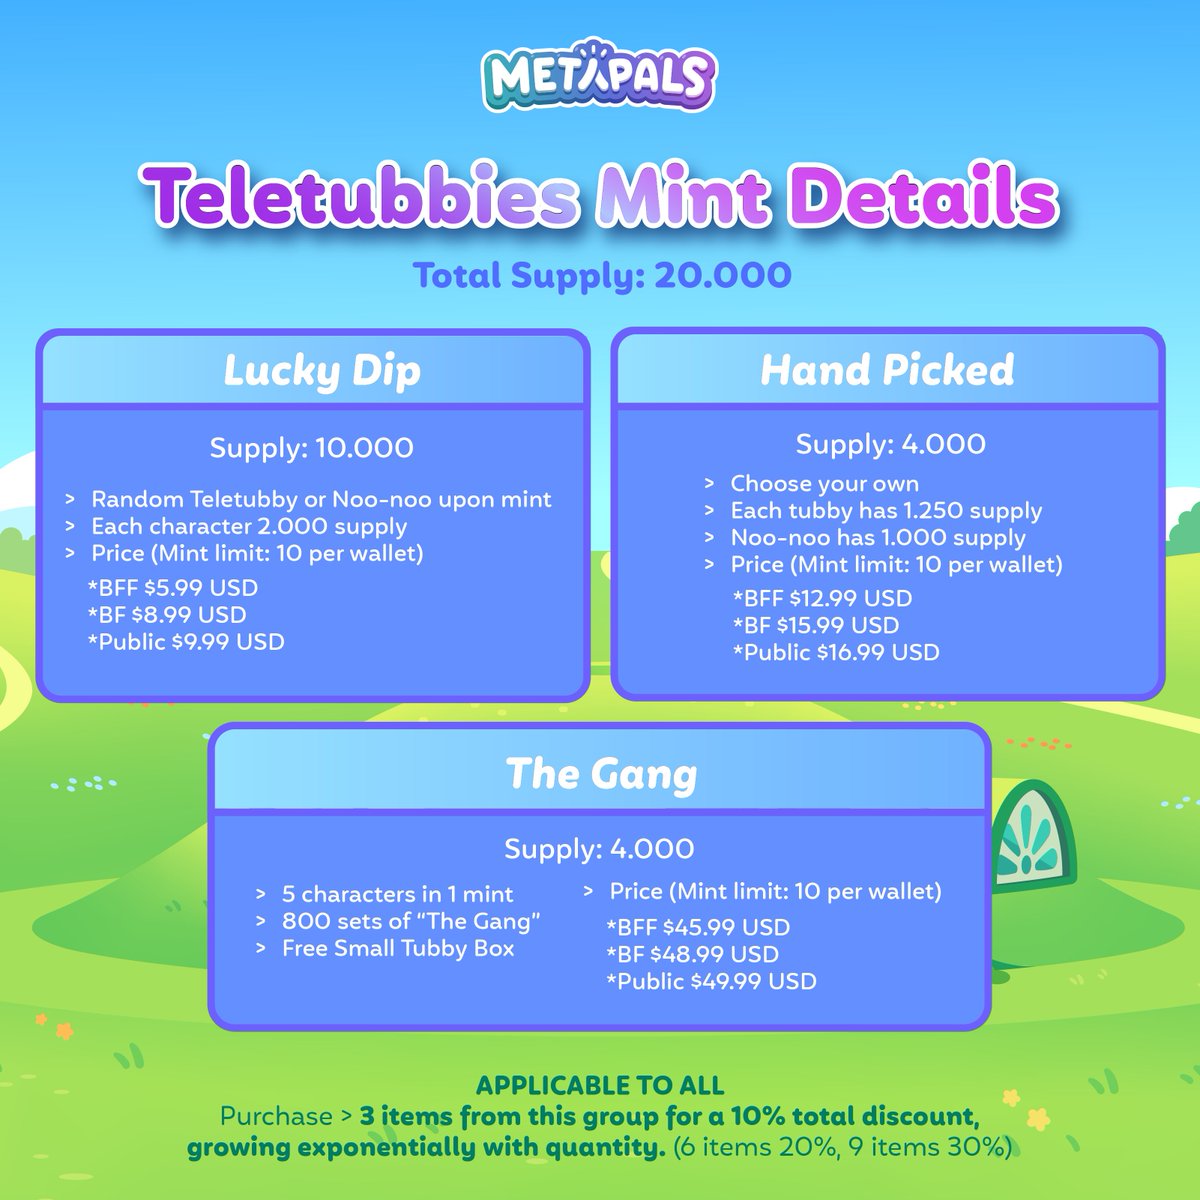 Teletubbies NFT Mint & Accessory Box Mint Details Teletubbies NFT DETAILS ‼️ Supply: 20,000 WEN? soon...👀 Accessory Box Mint Details ‼️ Supply: 20,000 each (Small, Medium, Large) Tezos ⛓️ Last chance to win BF or BFF list! Register over at this link⬇️…